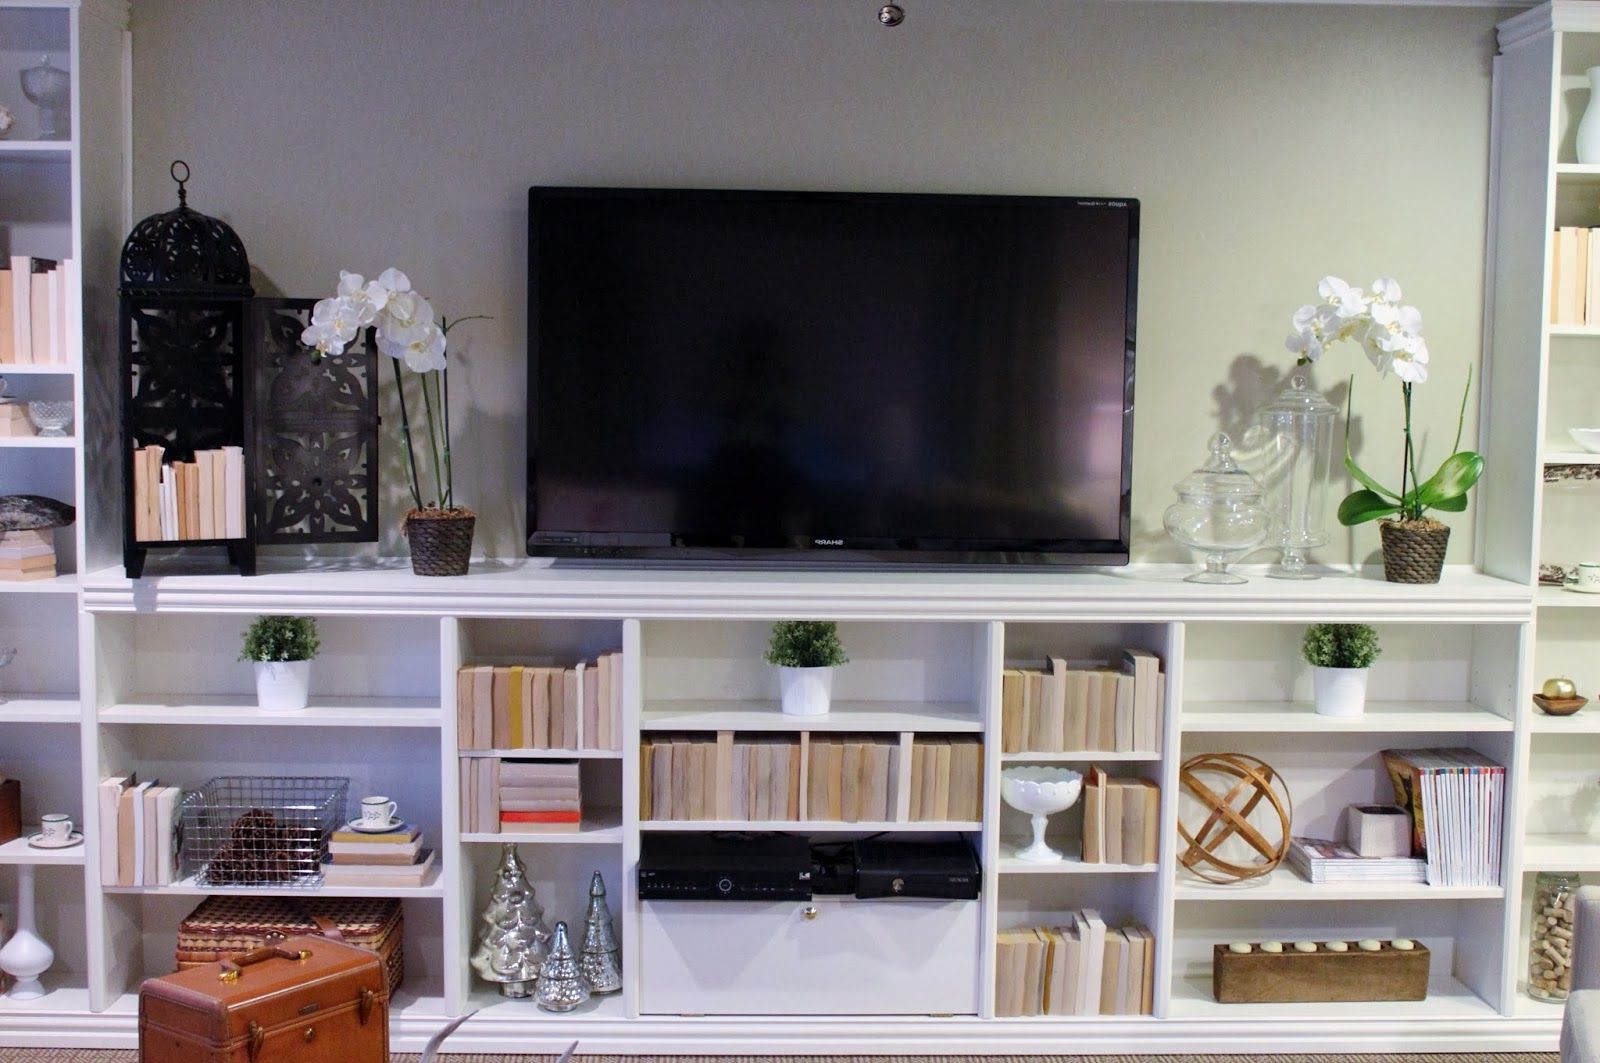 Bookshelf And Tv Stands Throughout Well Liked Tv Stand Bookshelf And Designs Ideas Plans Bookcase – Buyouapp (View 7 of 20)